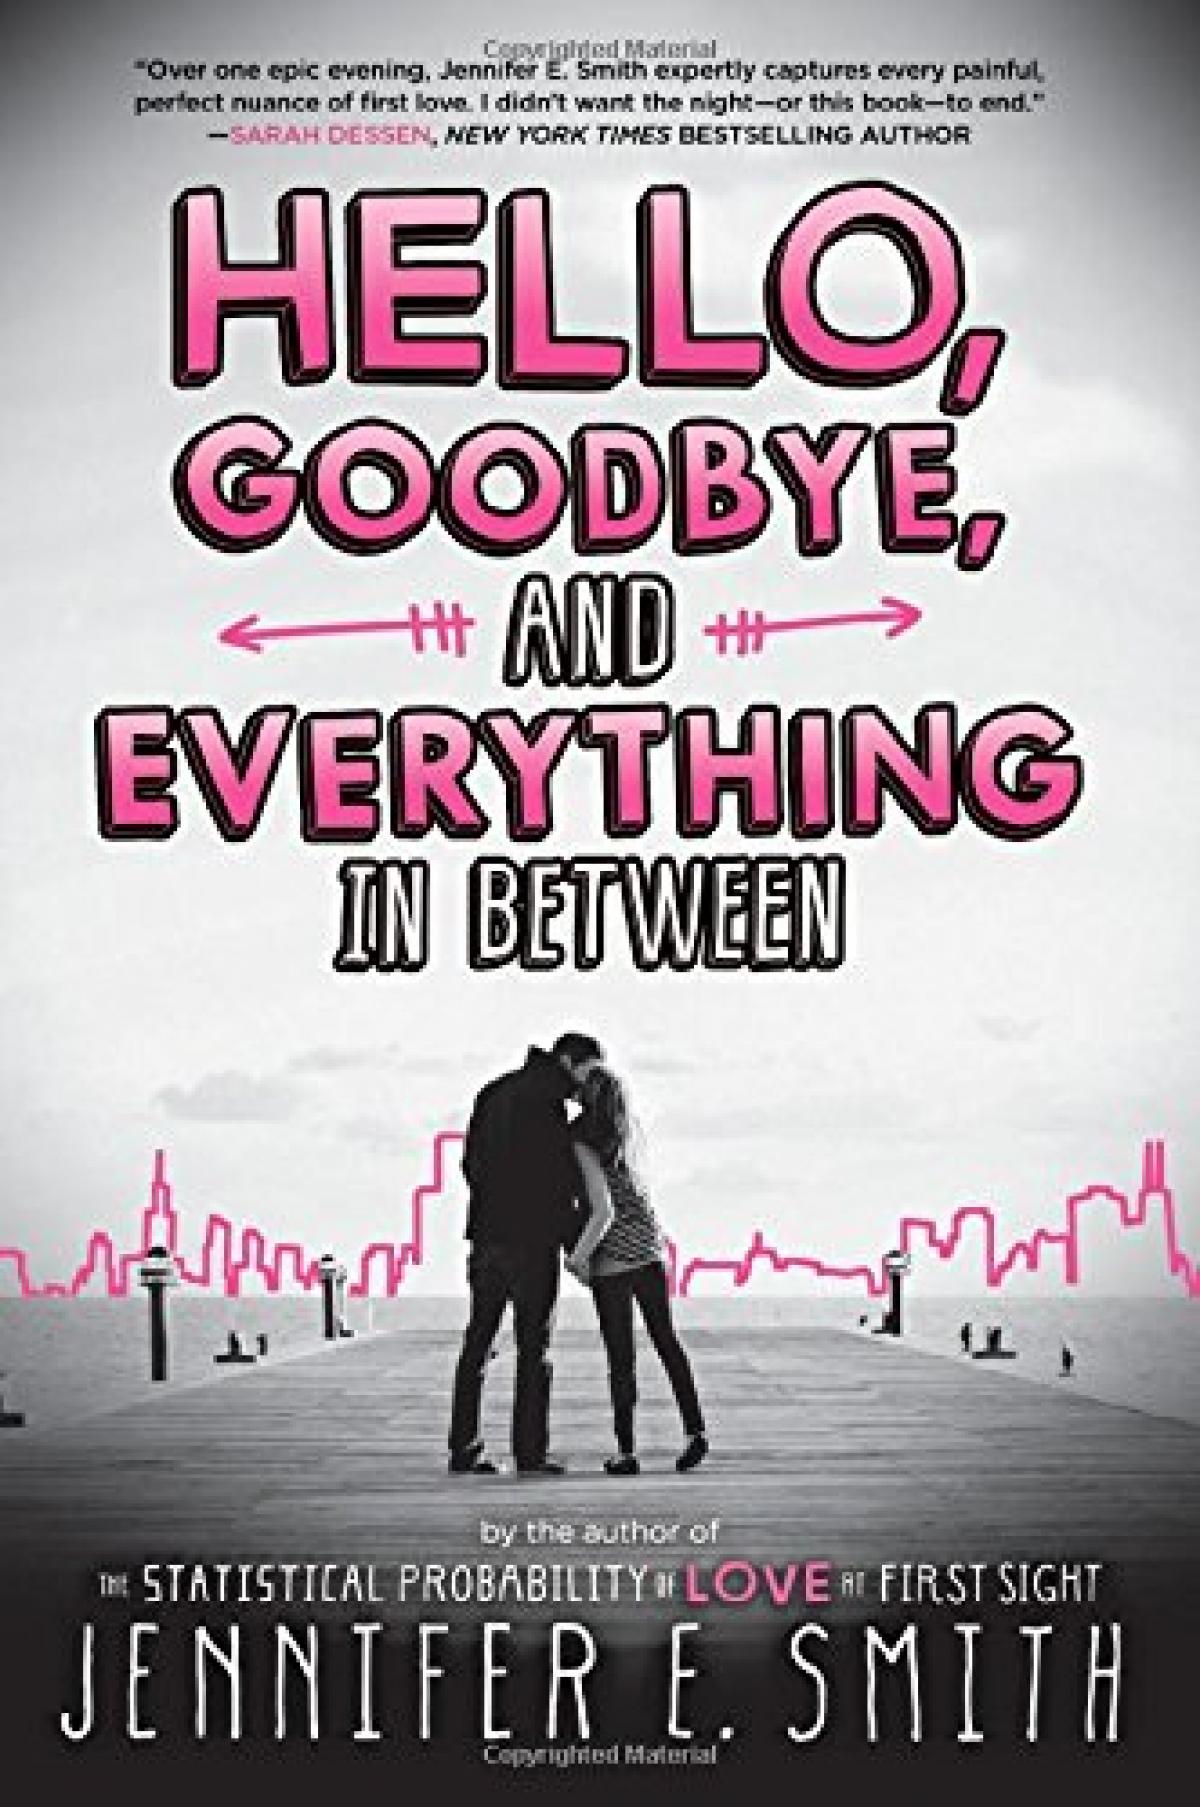 Hello, Goodbye and everything in between